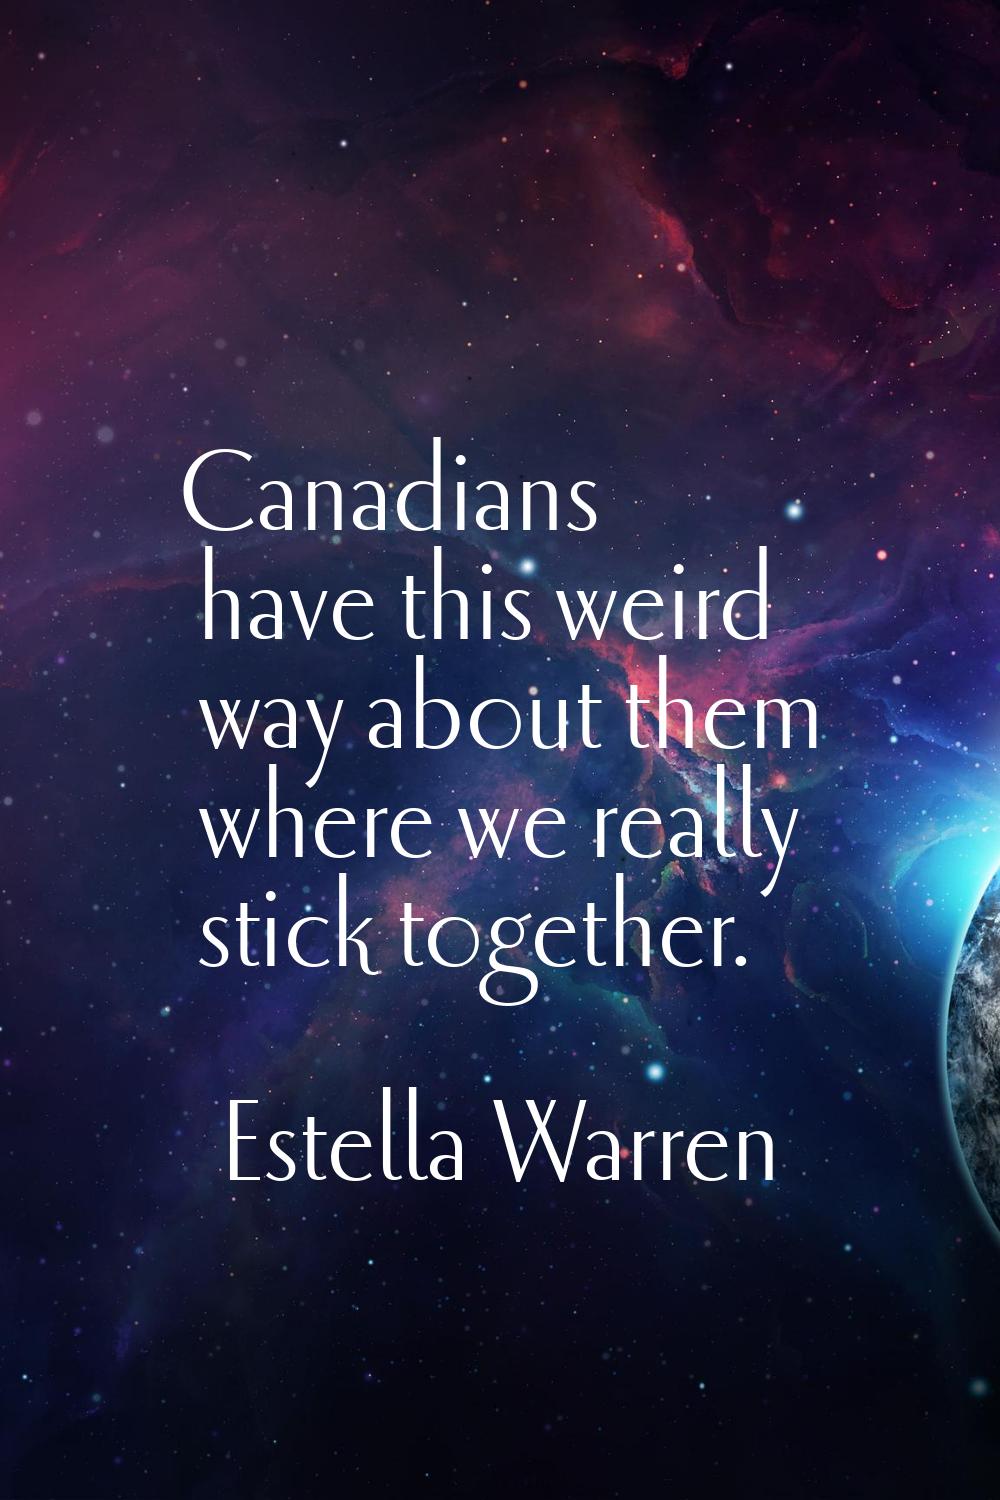 Canadians have this weird way about them where we really stick together.